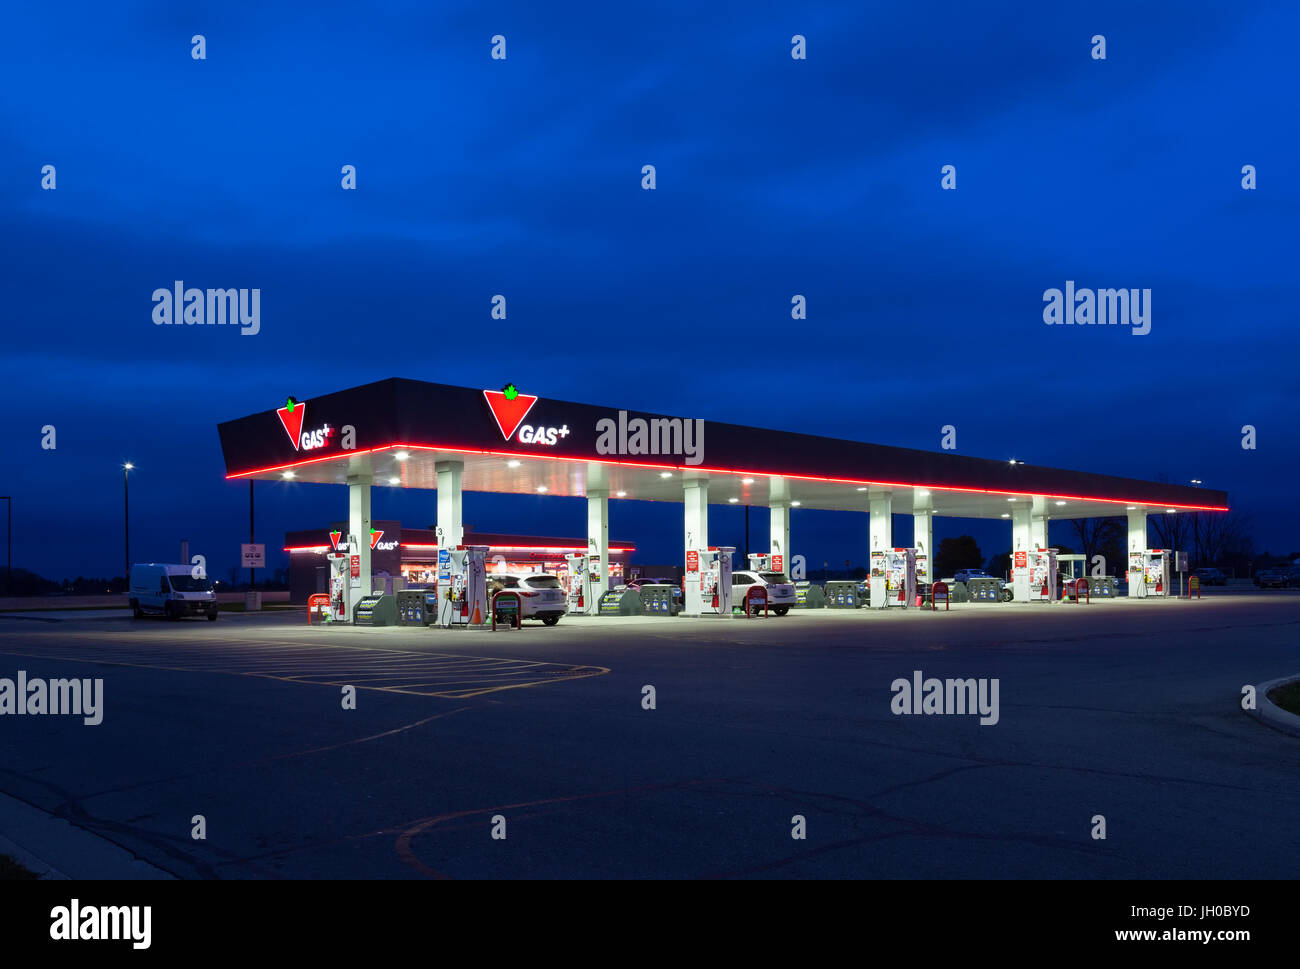 A Canadian Tire Gas Station at an ONroute service centre or travel plaza owned by Host Kilmer Service Centres HKSC in King City, York Region, Ontario. Stock Photo